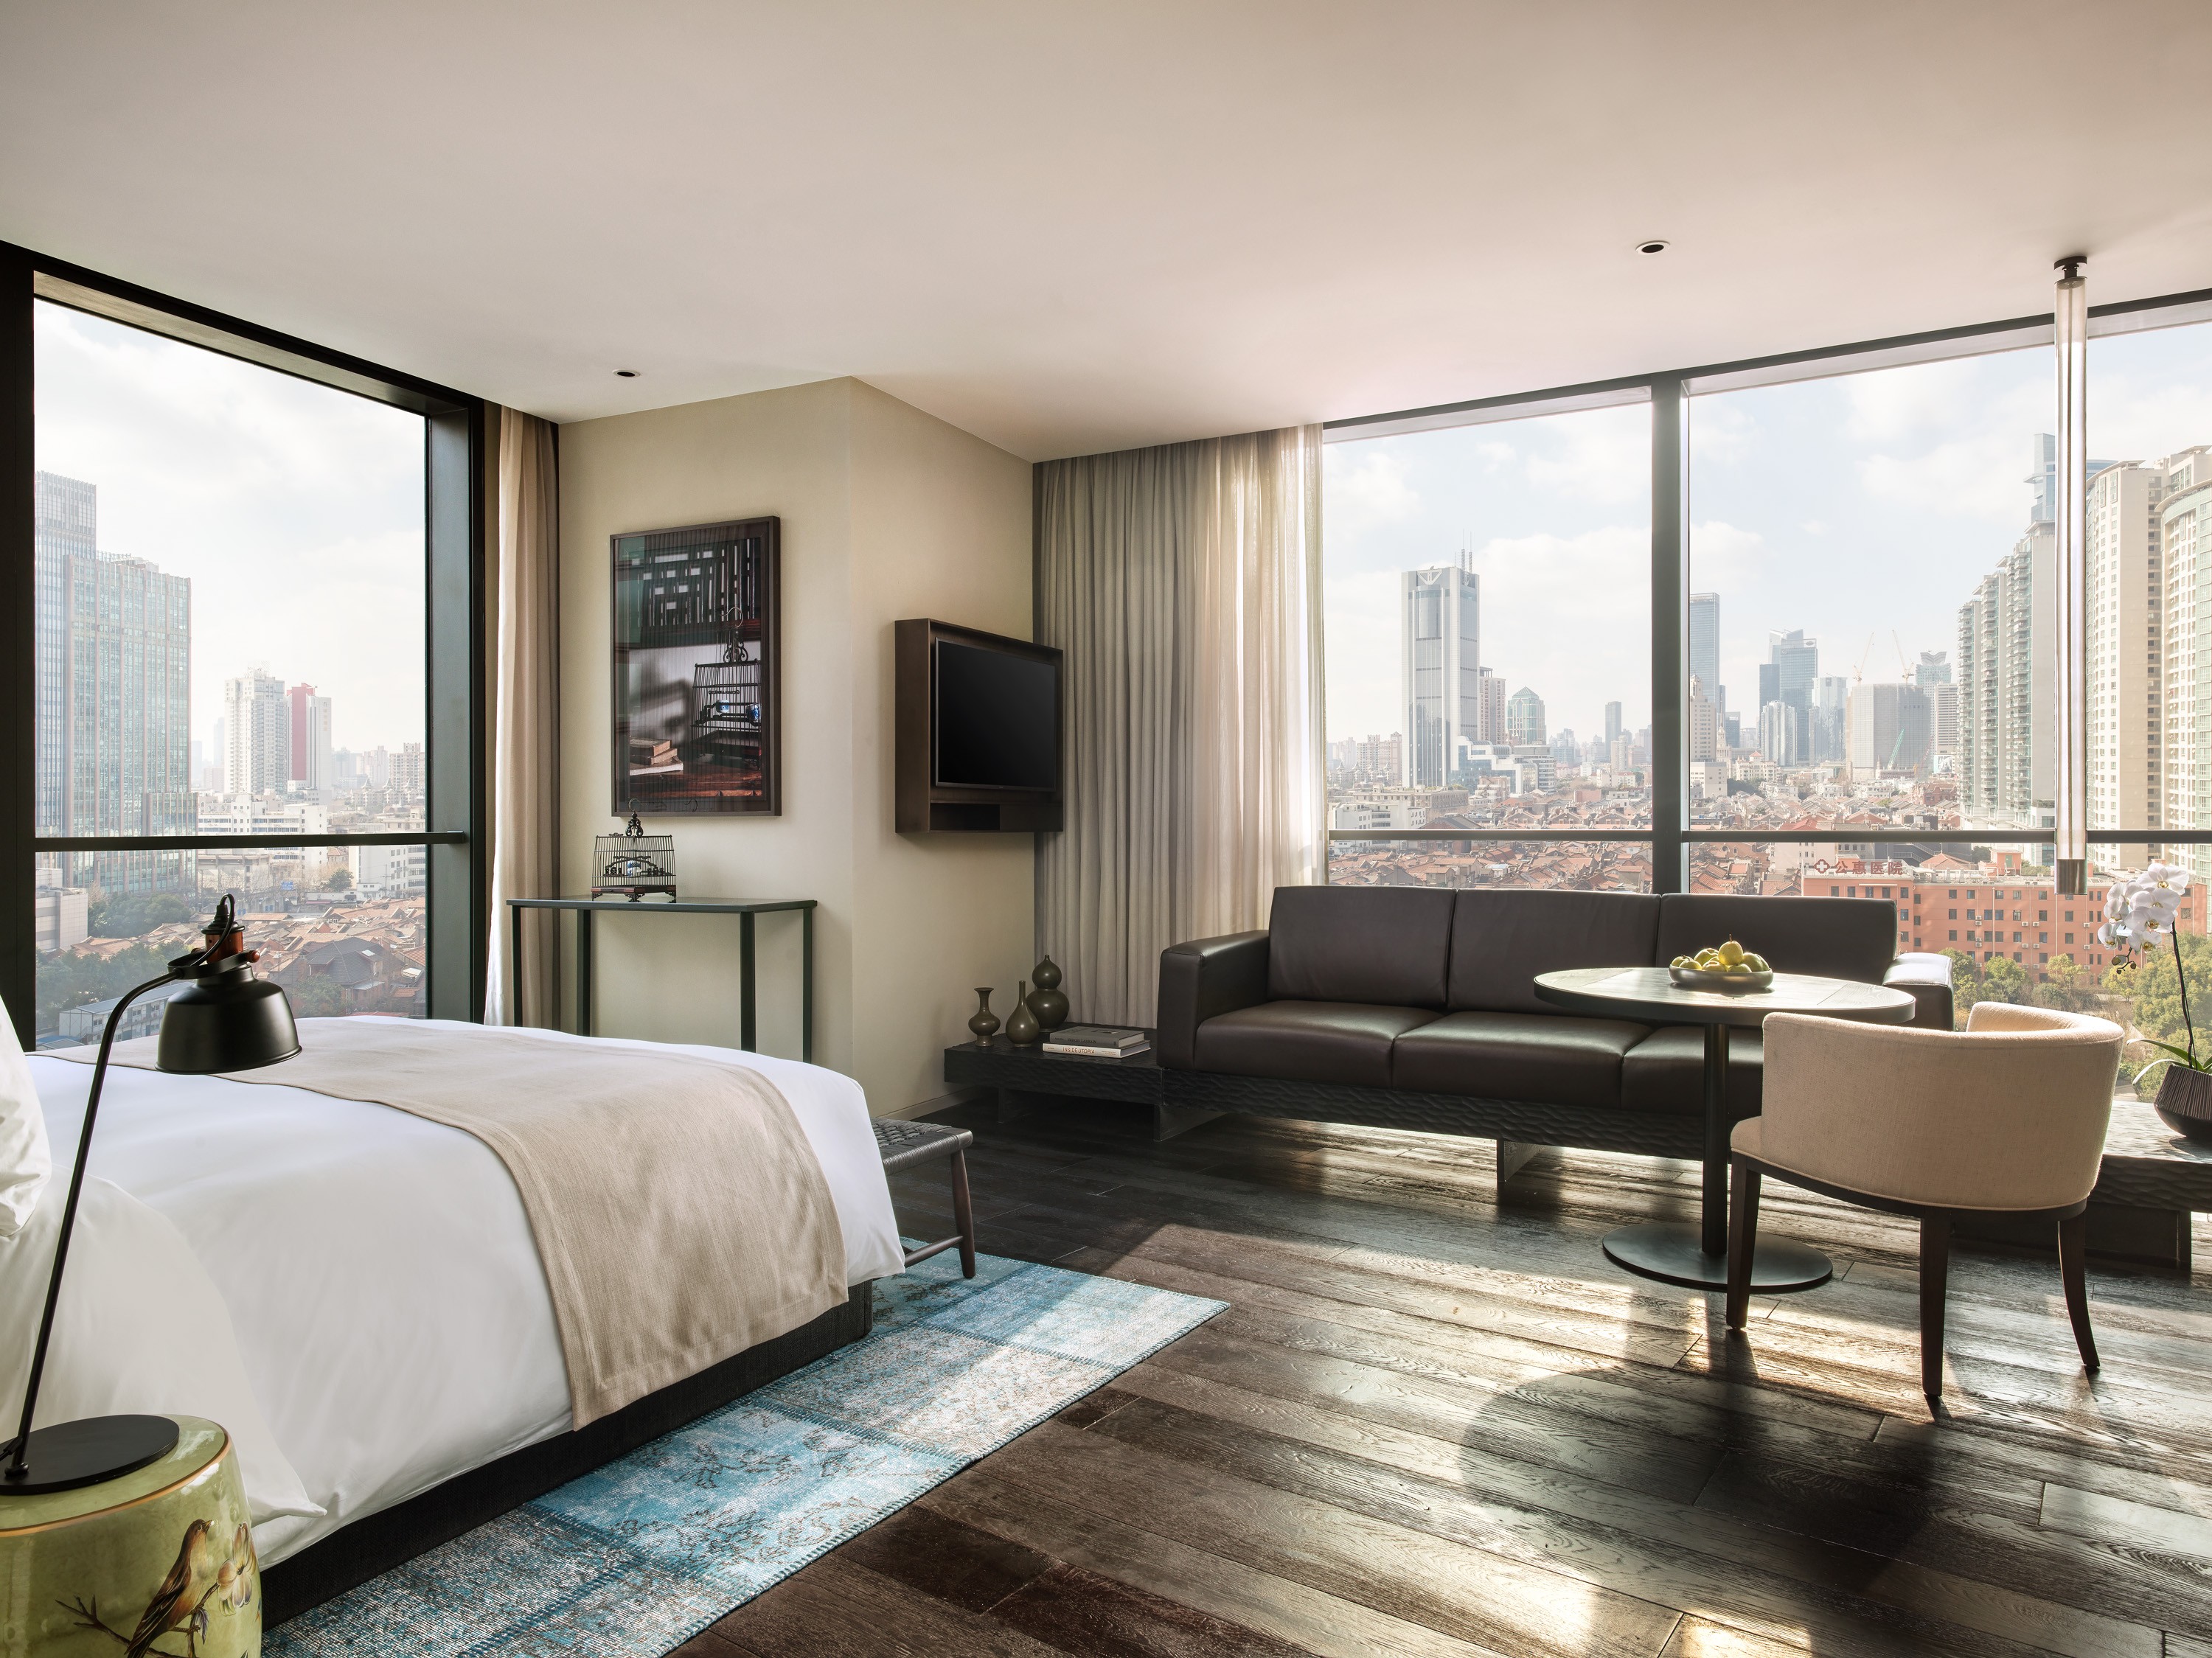 A room at The Middle House in Shanghai, a new hotel that has already become a home for the city’s hip and happening.